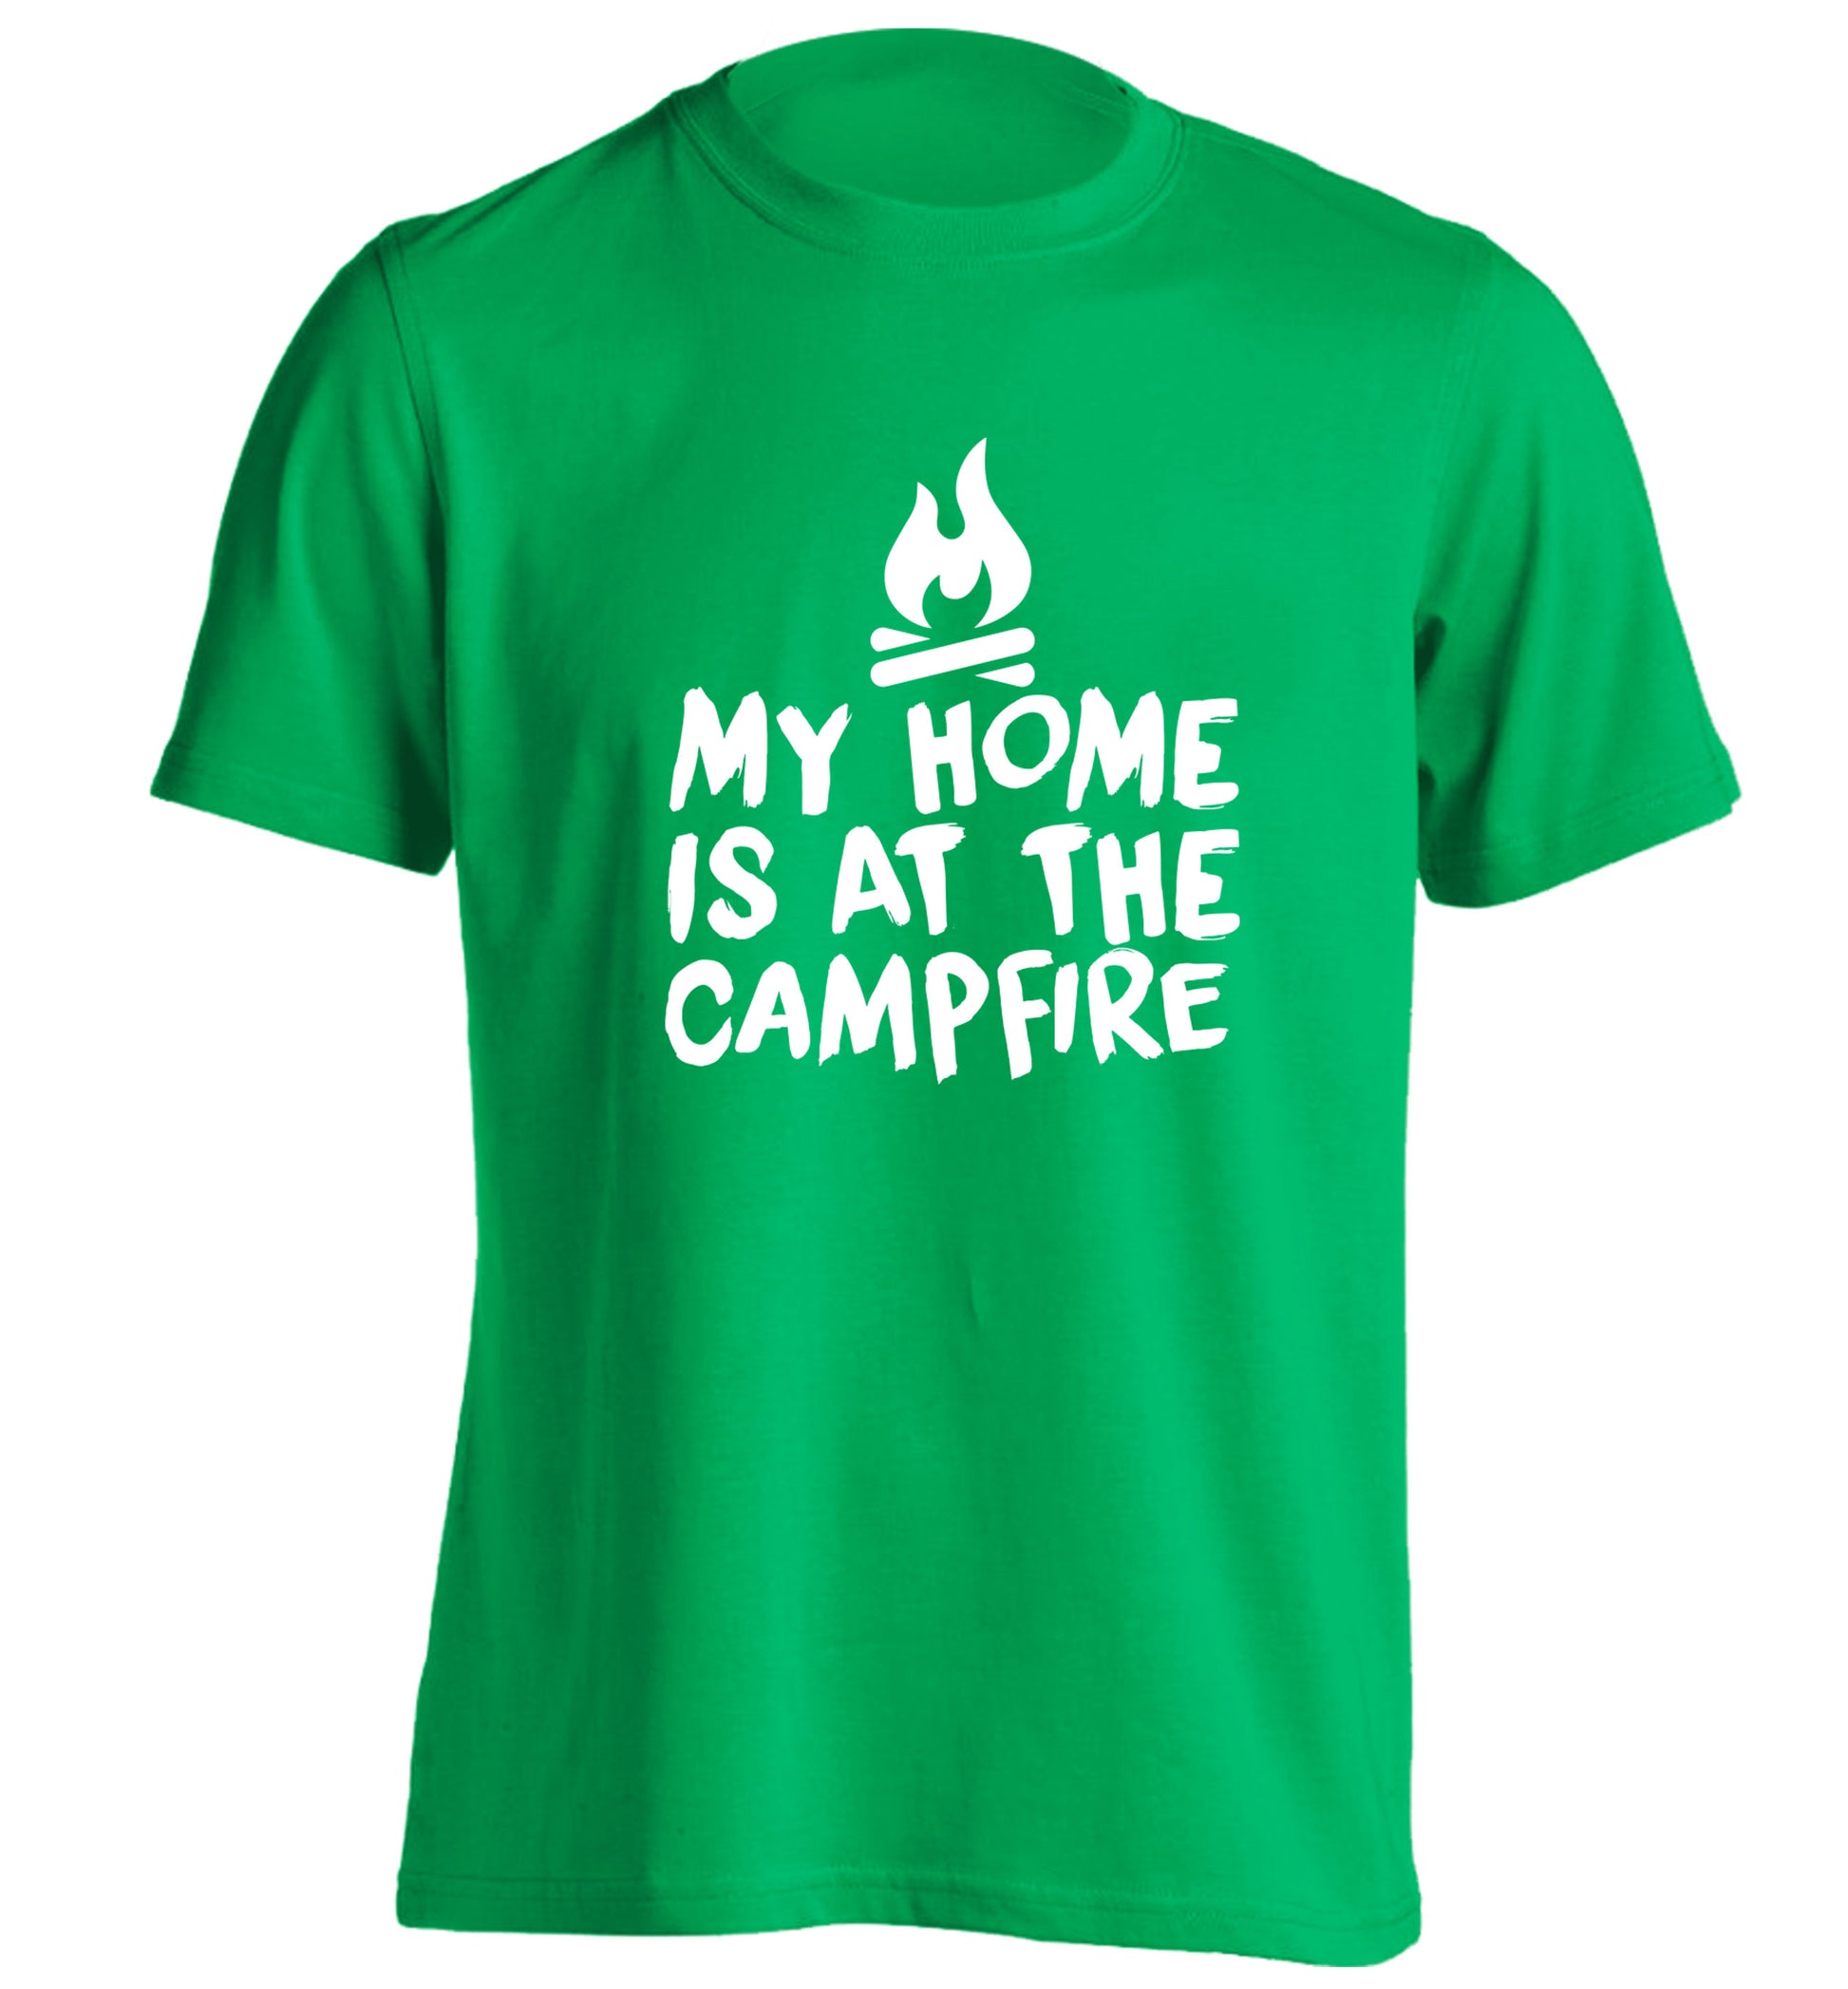 My home is at the campfire adults unisex green Tshirt 2XL